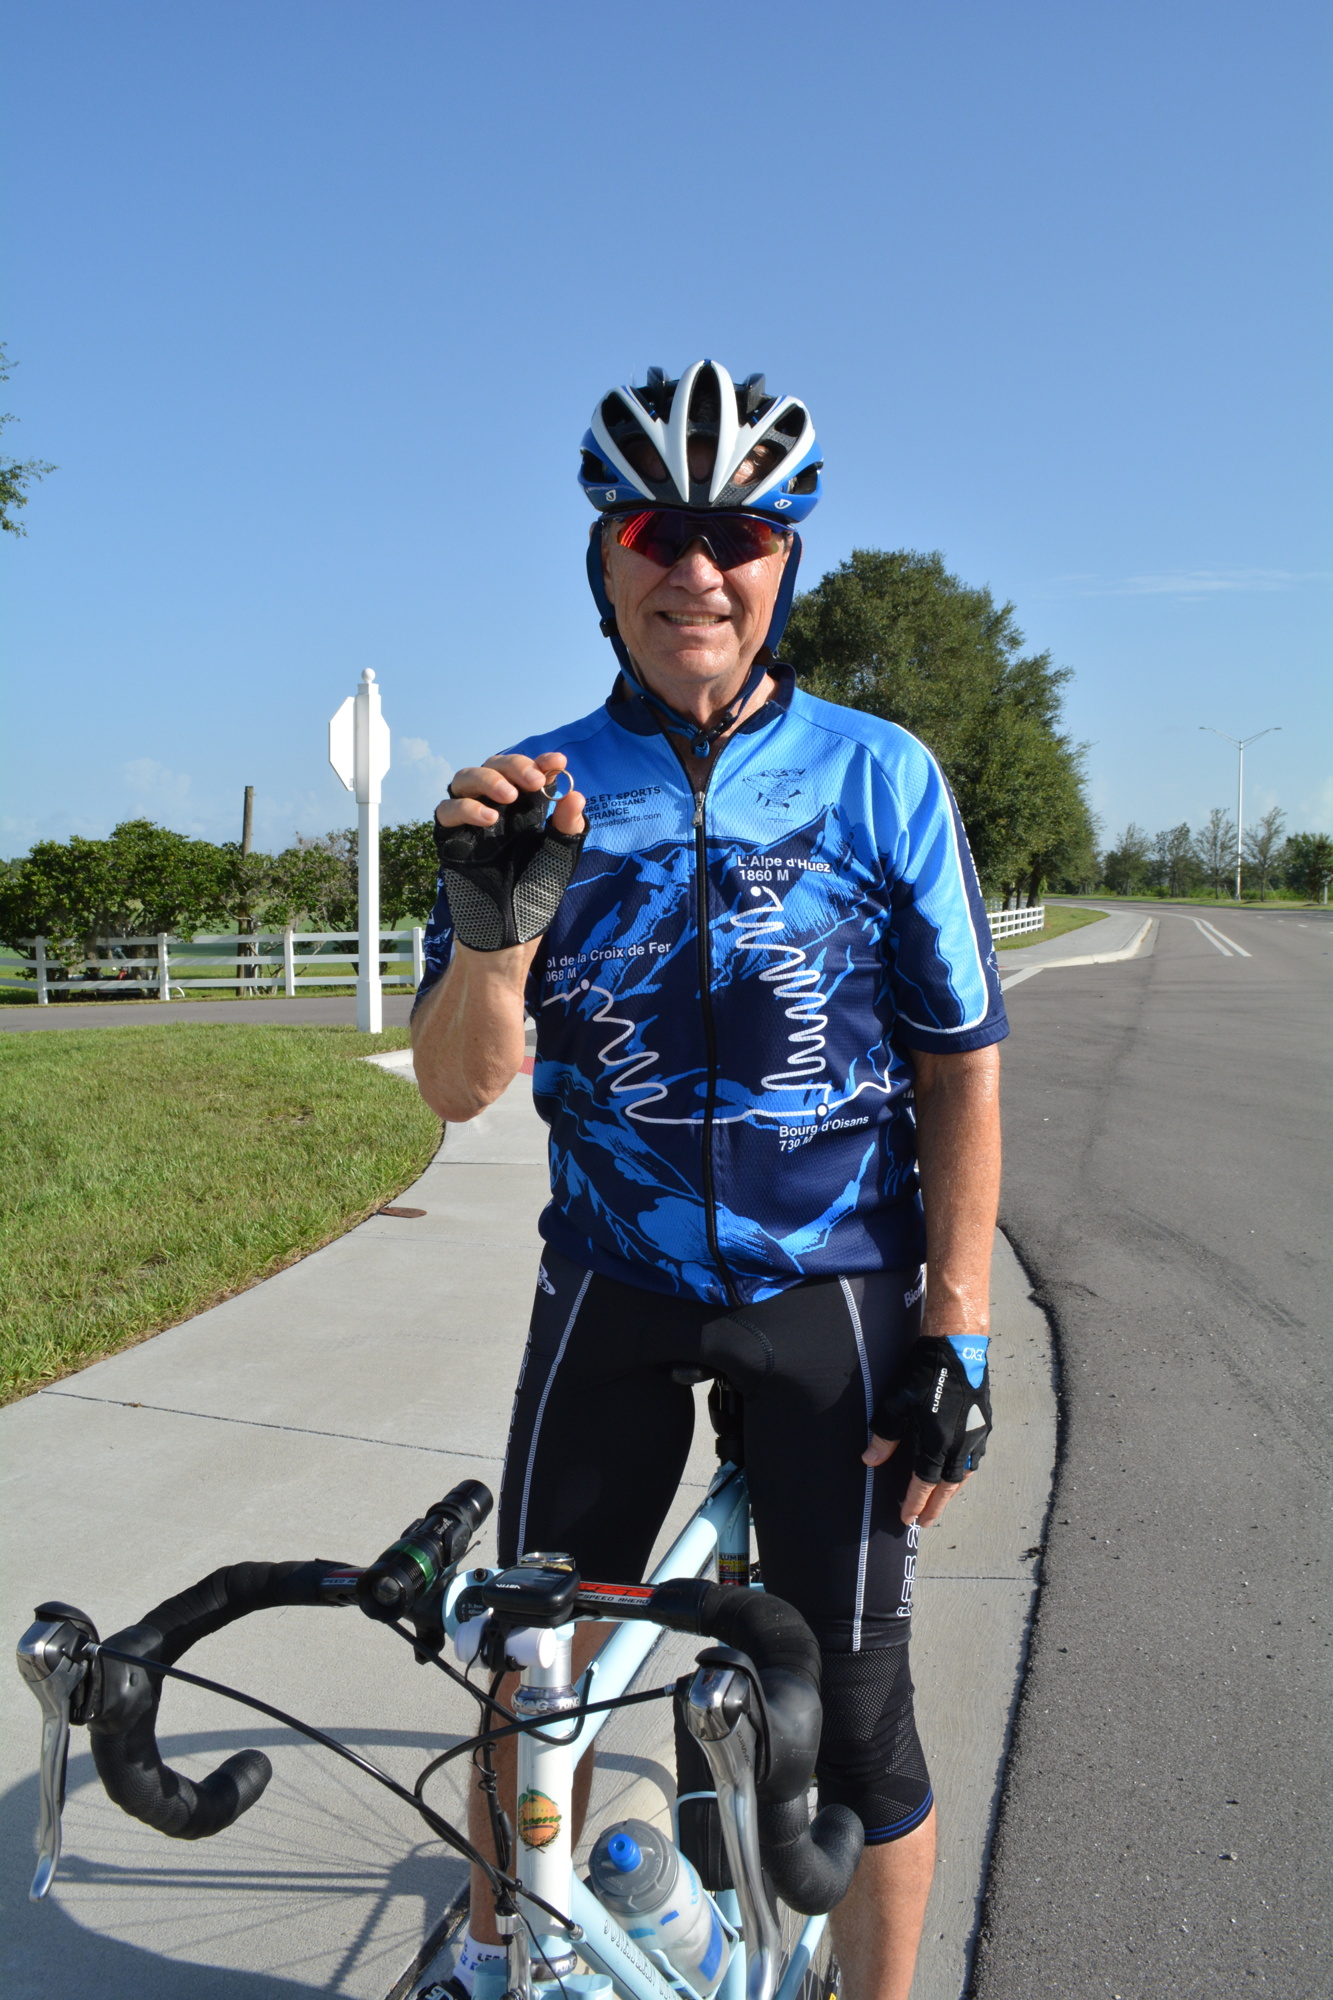 Country Club East resident Lou Deeter frequently finds things during his morning bicycle rides. On July 13, he found a wedding band on Lorraine Road.